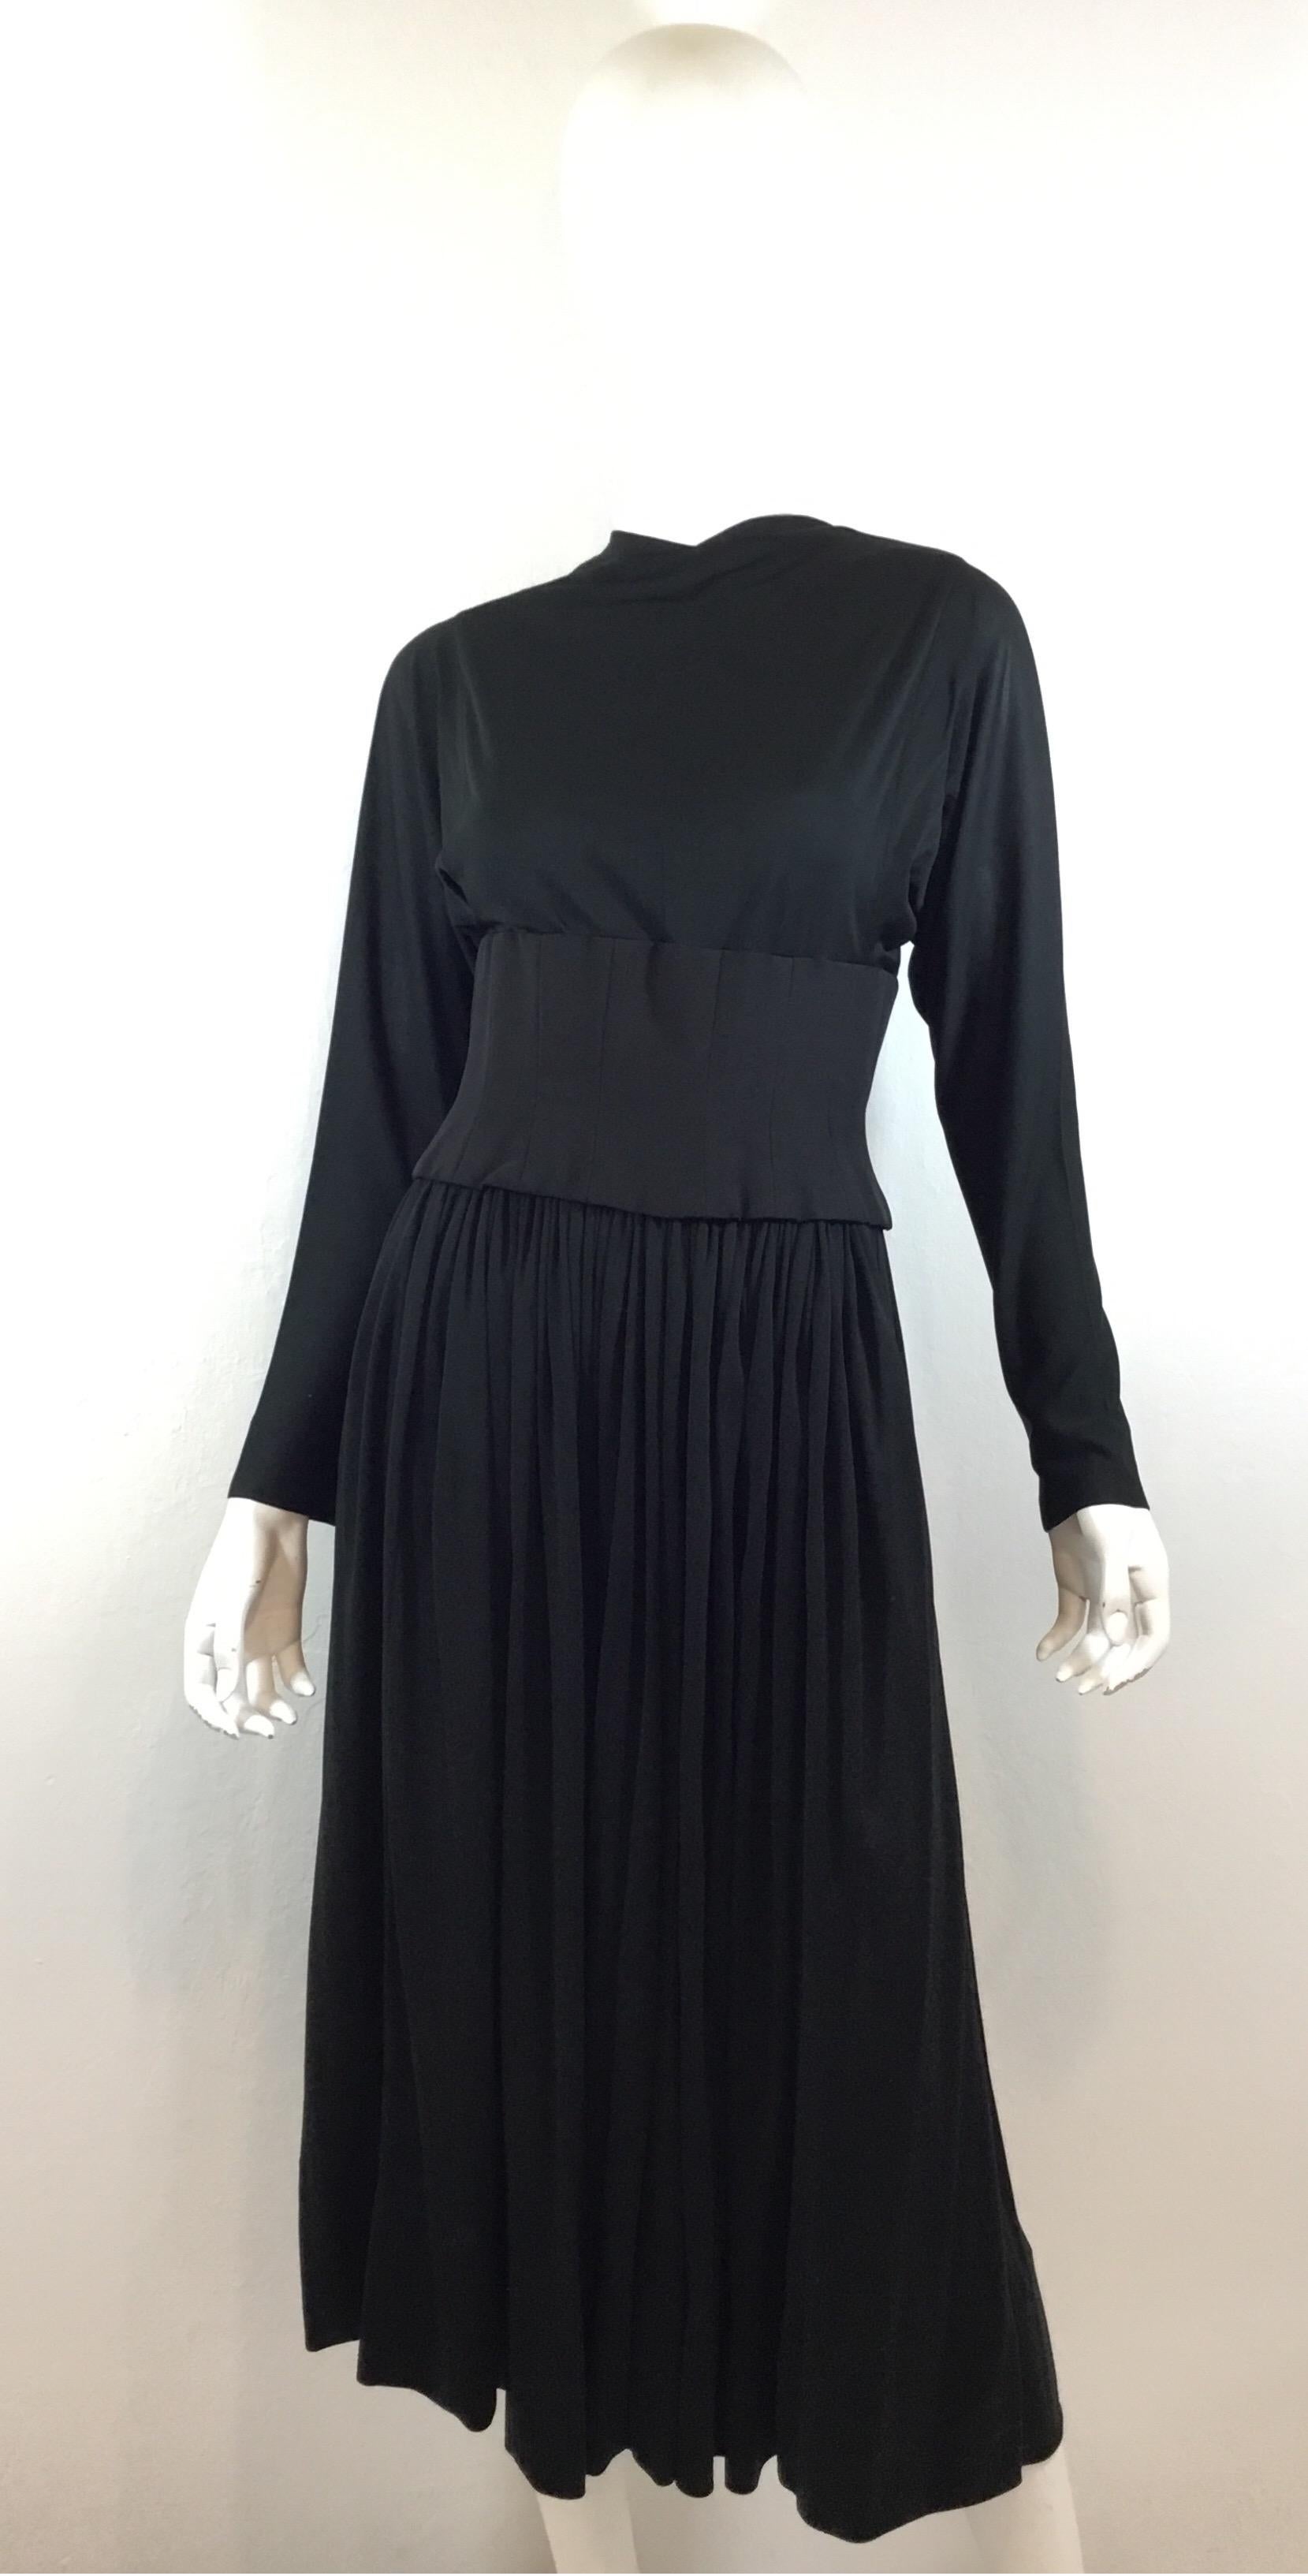 Norman Norell vintage 1940s black matte jersey blouse and skirt set. Blouse has a laced attached boned and corseted faille corset waistband and dolman cut sleeves. Skirt has a side metal zipper and hook fastening with a sweeping hem. Skirt and